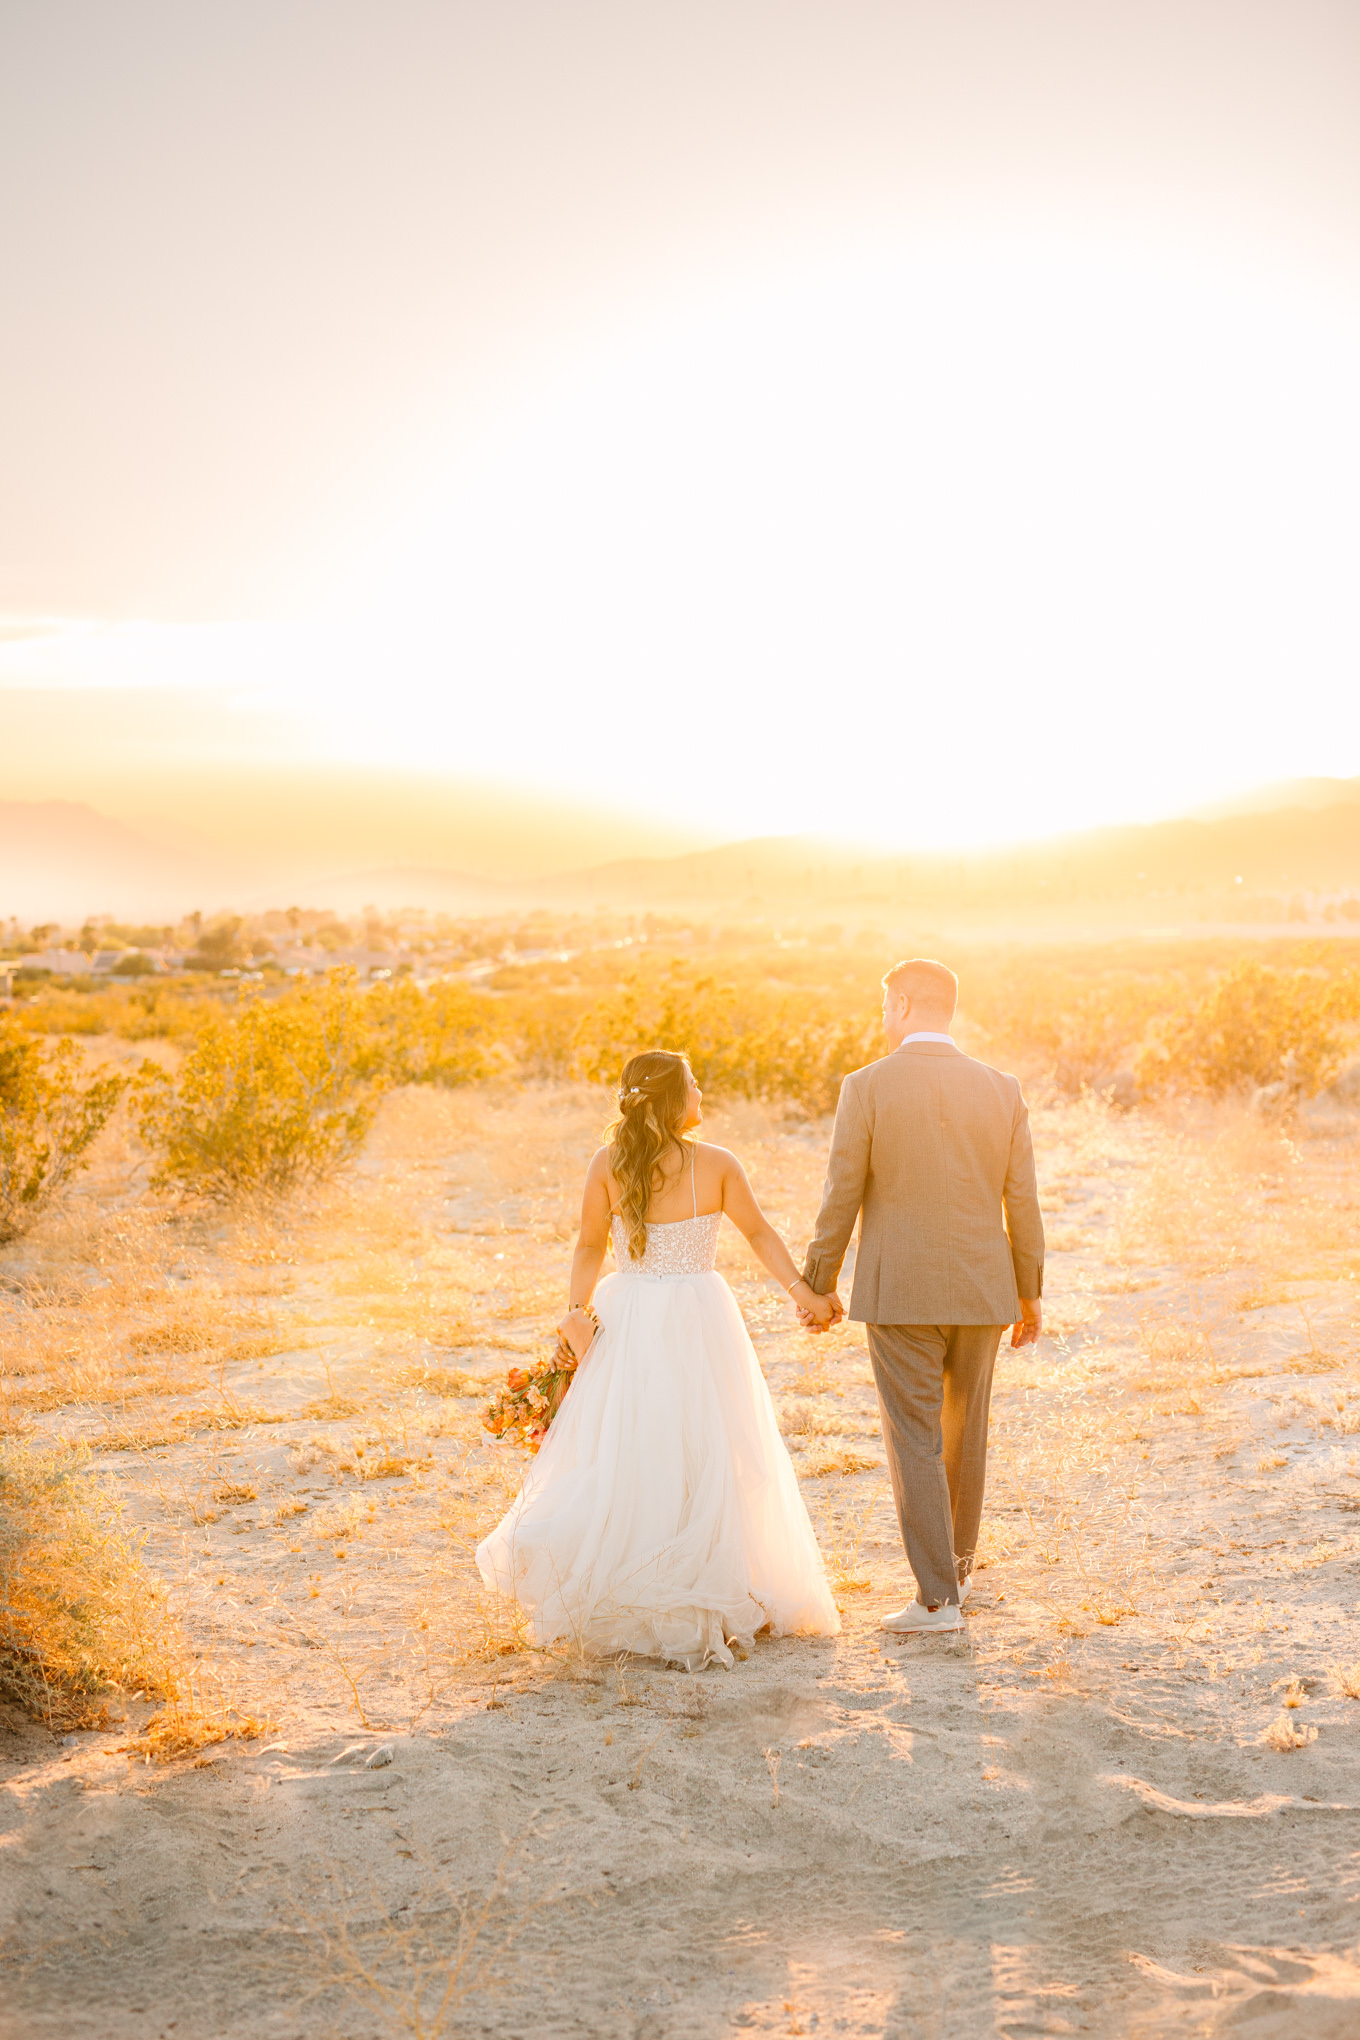 Desert sunset portrait | Pink and orange Lautner Compound wedding | Colorful Palm Springs wedding photography | #palmspringsphotographer #palmspringswedding #lautnercompound #southerncaliforniawedding  Source: Mary Costa Photography | Los Angeles